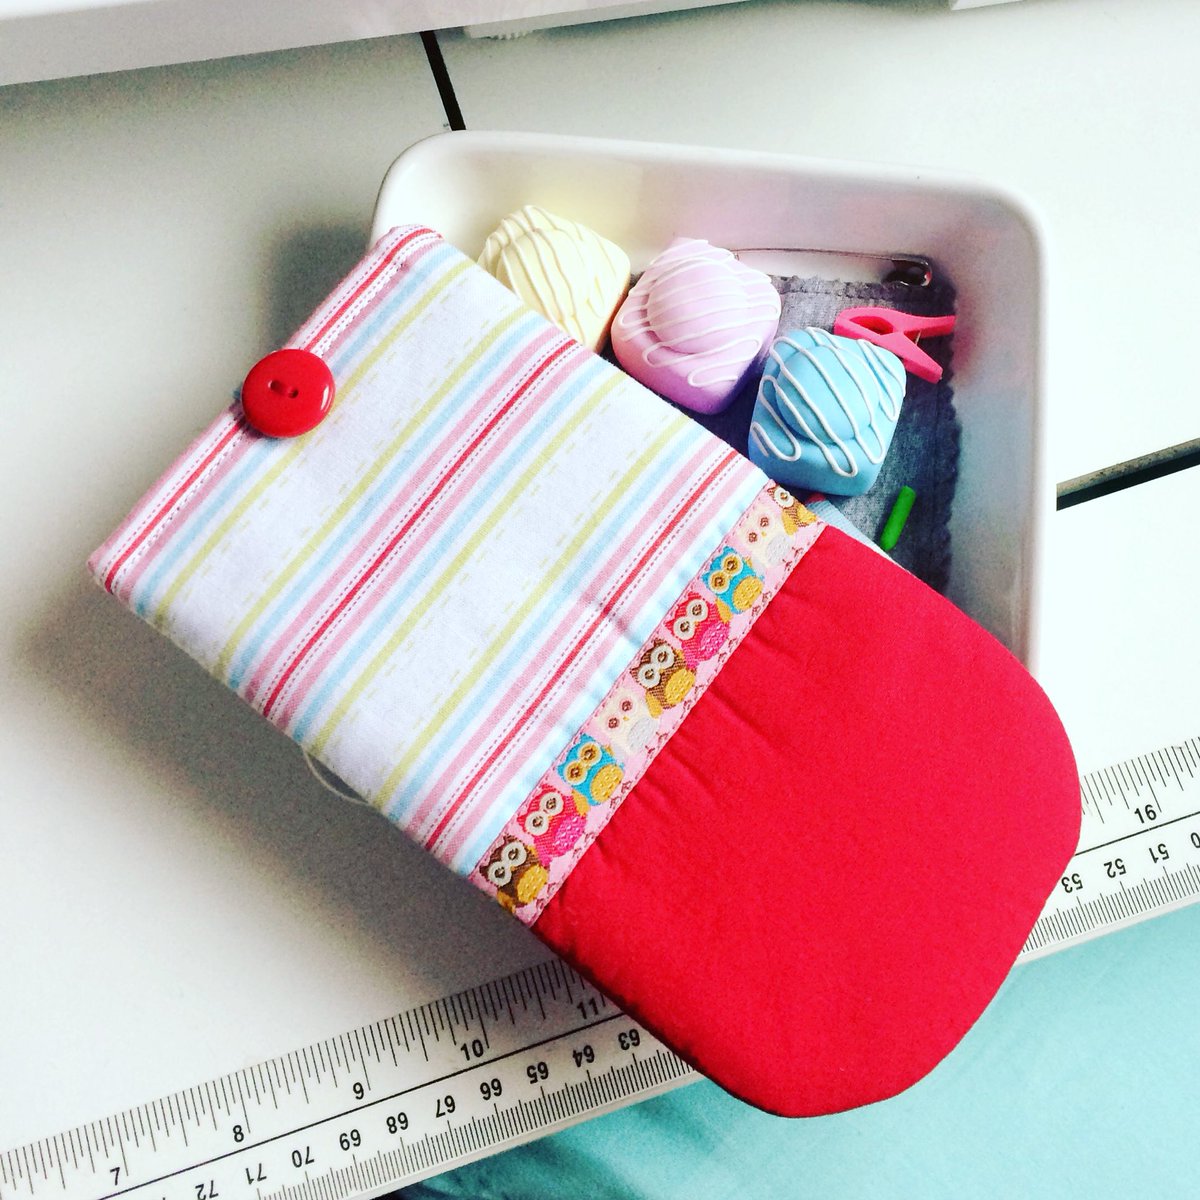 Soon to be added to the shop doniquedesigns.etsy.com This bright cheery sunglasses case 🤗 #etsy #sunglasses #summeraccesories #red #stripey #unique #ooak #glassescase #handmadegifts #owltrim #owls #owlprint #cuteowls #pastel #stripes #cotton